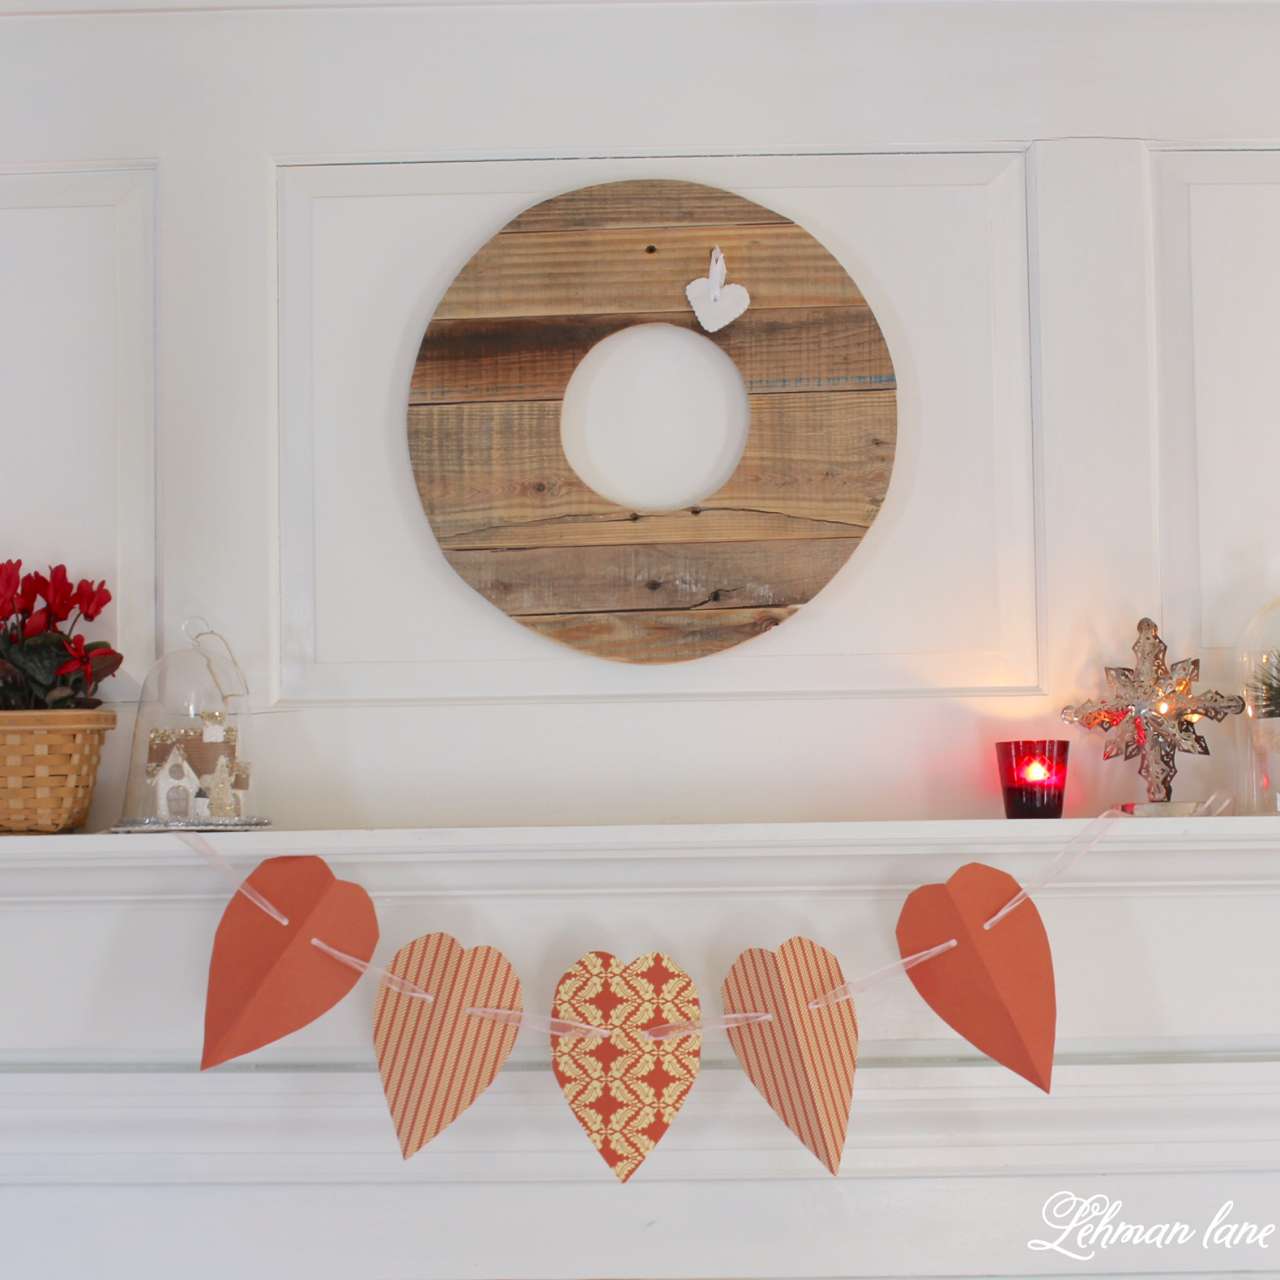 Come check out my Valentine's day decor and check out what my friends created for our blog hop!